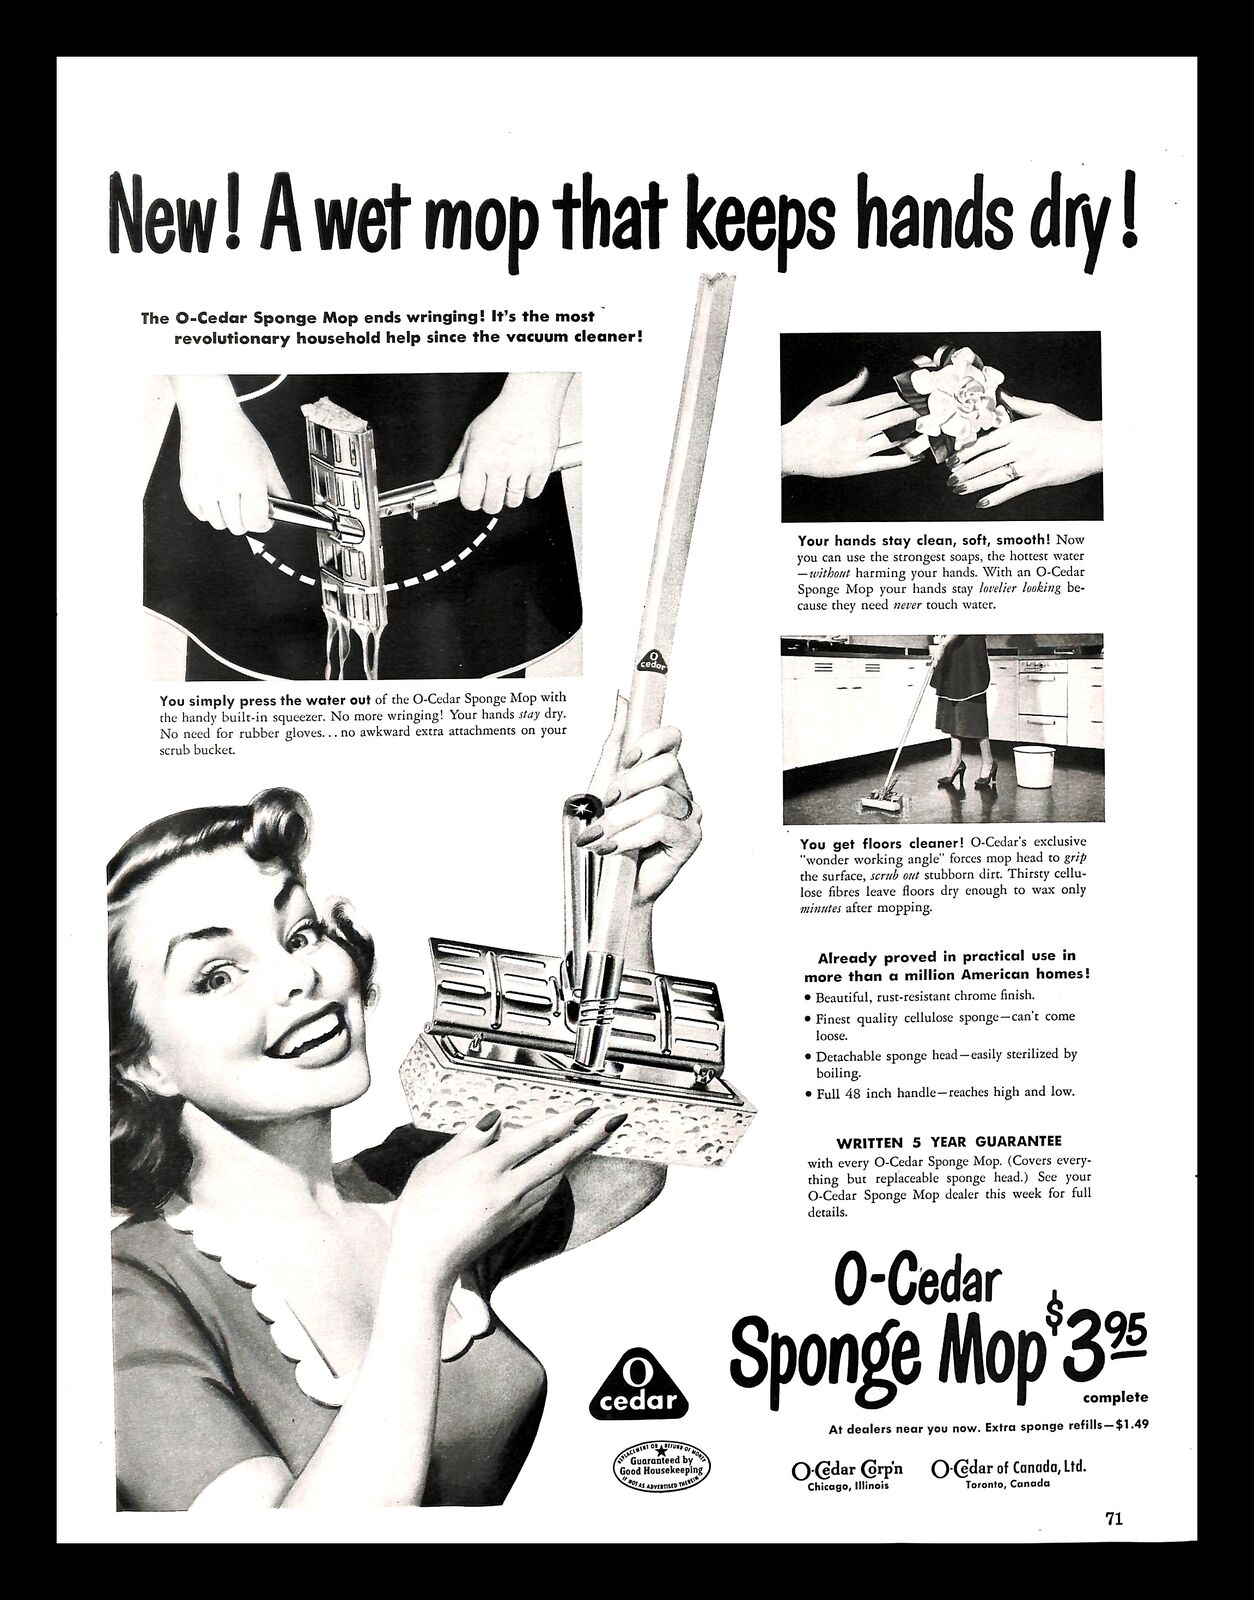 1951 O-Cedar Sponge Mop Vintage PRINT AD Housewife Kitchen Cleaning 1950s